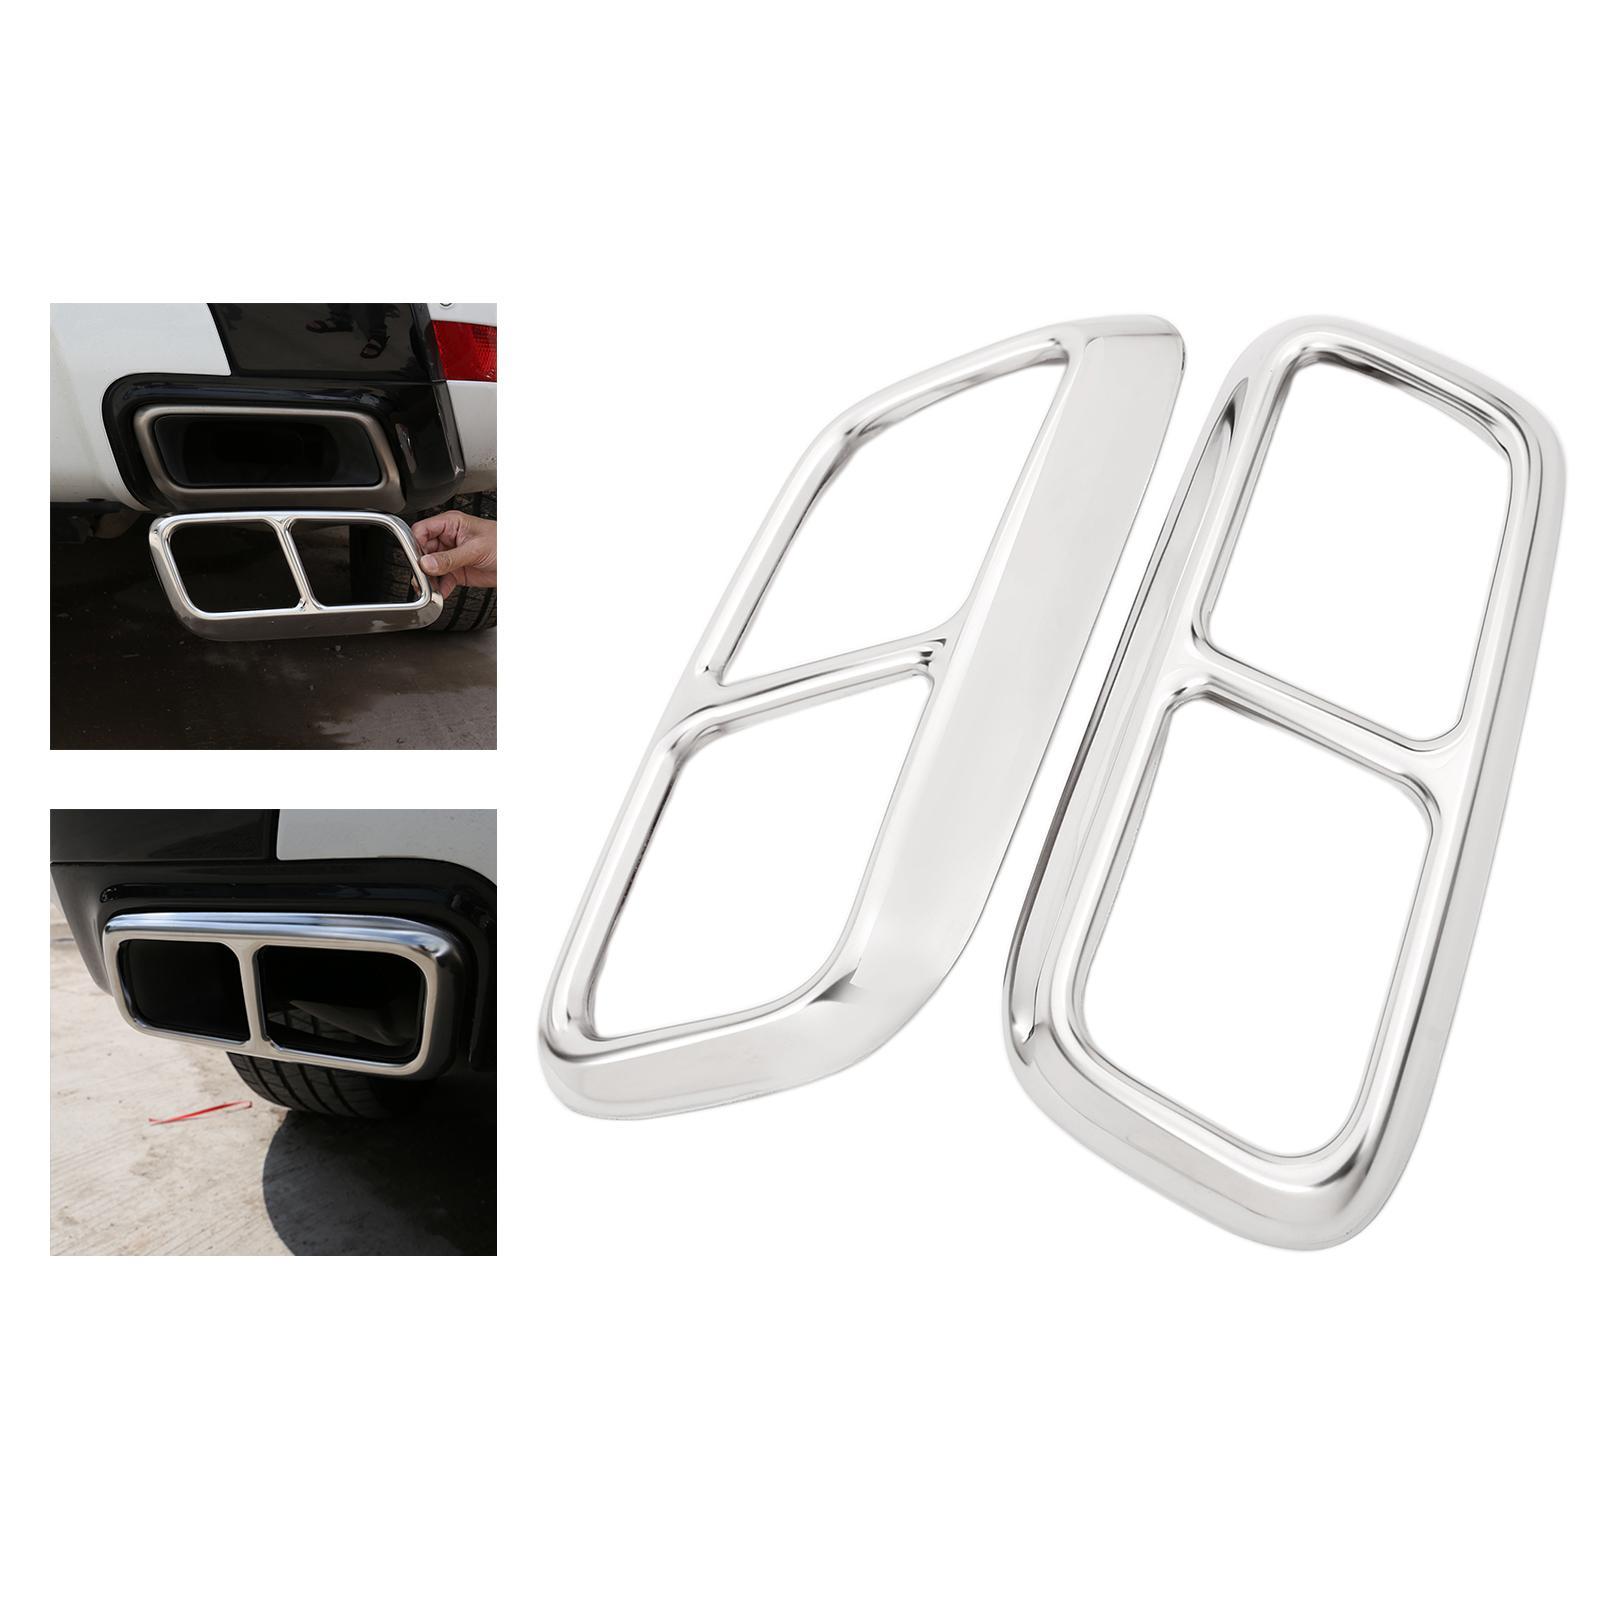 Exhaust Tail Pipe Trim Cover for Range Rover Parts Accessories